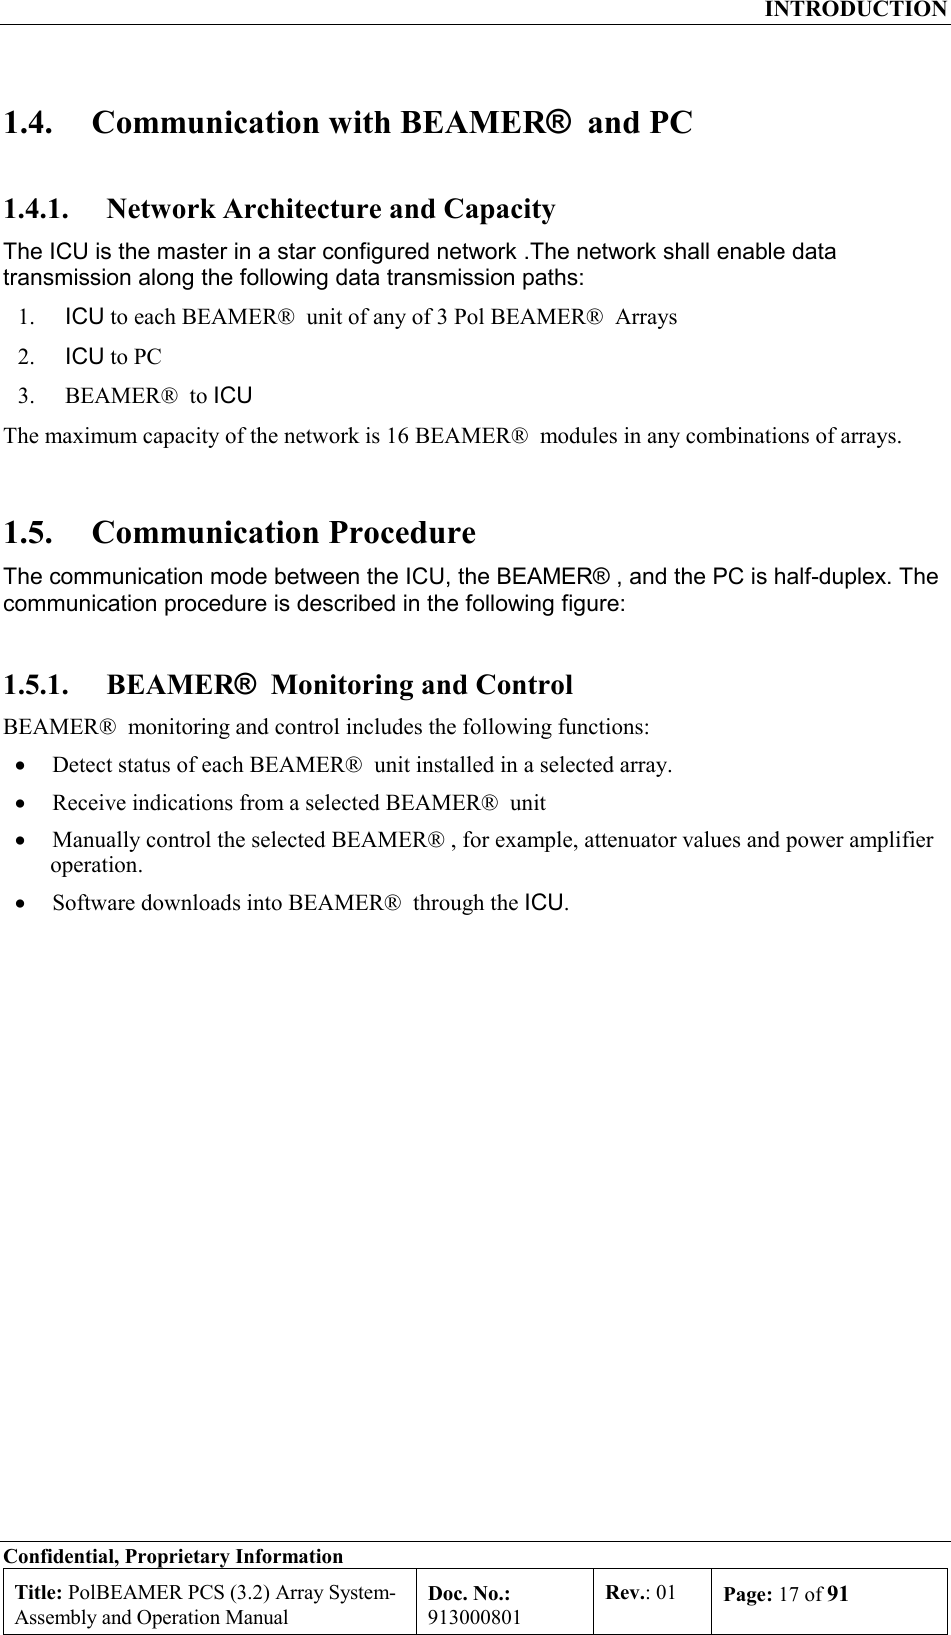  INTRODUCTION Confidential, Proprietary Information Title: PolBEAMER PCS (3.2) Array System- Assembly and Operation Manual Doc. No.: 913000801 Rev.: 01  Page: 17 of 91  1.4.  Communication with BEAMER®  and PC 1.4.1.  Network Architecture and Capacity The ICU is the master in a star configured network .The network shall enable data transmission along the following data transmission paths: 1.  ICU to each BEAMER®  unit of any of 3 Pol BEAMER®  Arrays 2.  ICU to PC 3.  BEAMER®  to ICU The maximum capacity of the network is 16 BEAMER®  modules in any combinations of arrays. 1.5. Communication Procedure The communication mode between the ICU, the BEAMER® , and the PC is half-duplex. The communication procedure is described in the following figure:  1.5.1. BEAMER®  Monitoring and Control BEAMER®  monitoring and control includes the following functions: •  Detect status of each BEAMER®  unit installed in a selected array.  •  Receive indications from a selected BEAMER®  unit  •  Manually control the selected BEAMER® , for example, attenuator values and power amplifier operation. •  Software downloads into BEAMER®  through the ICU. 